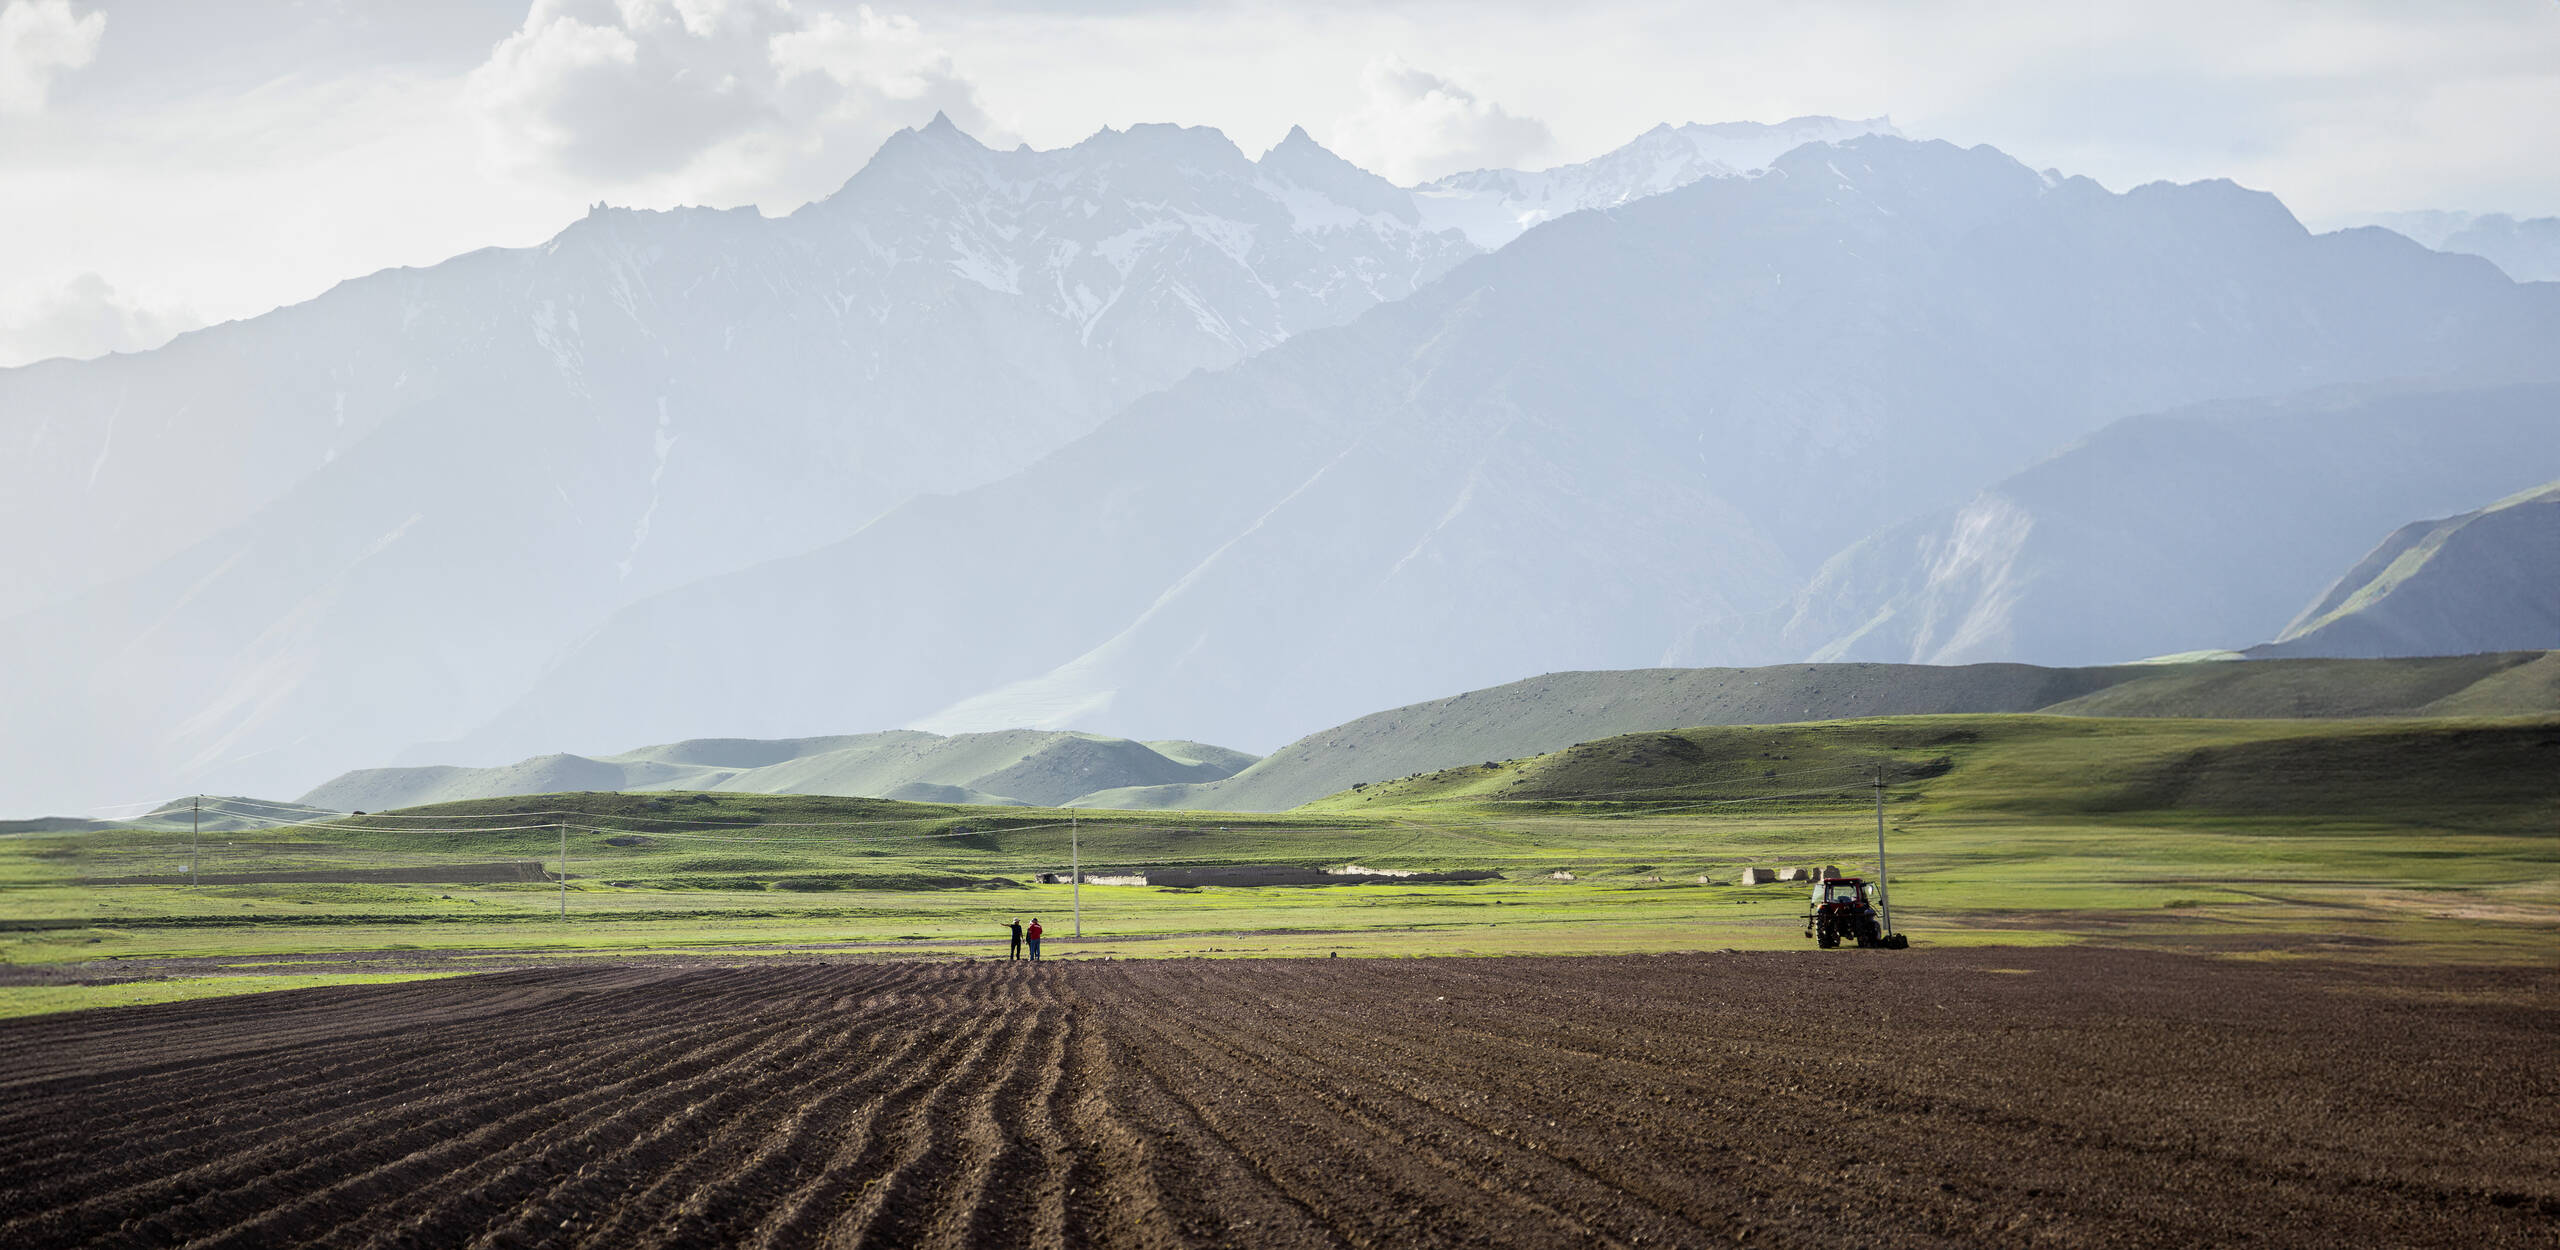 Farmers in Tajikistan depend on the weather. Caritas supports them in working with the weather and adapting to climate change.